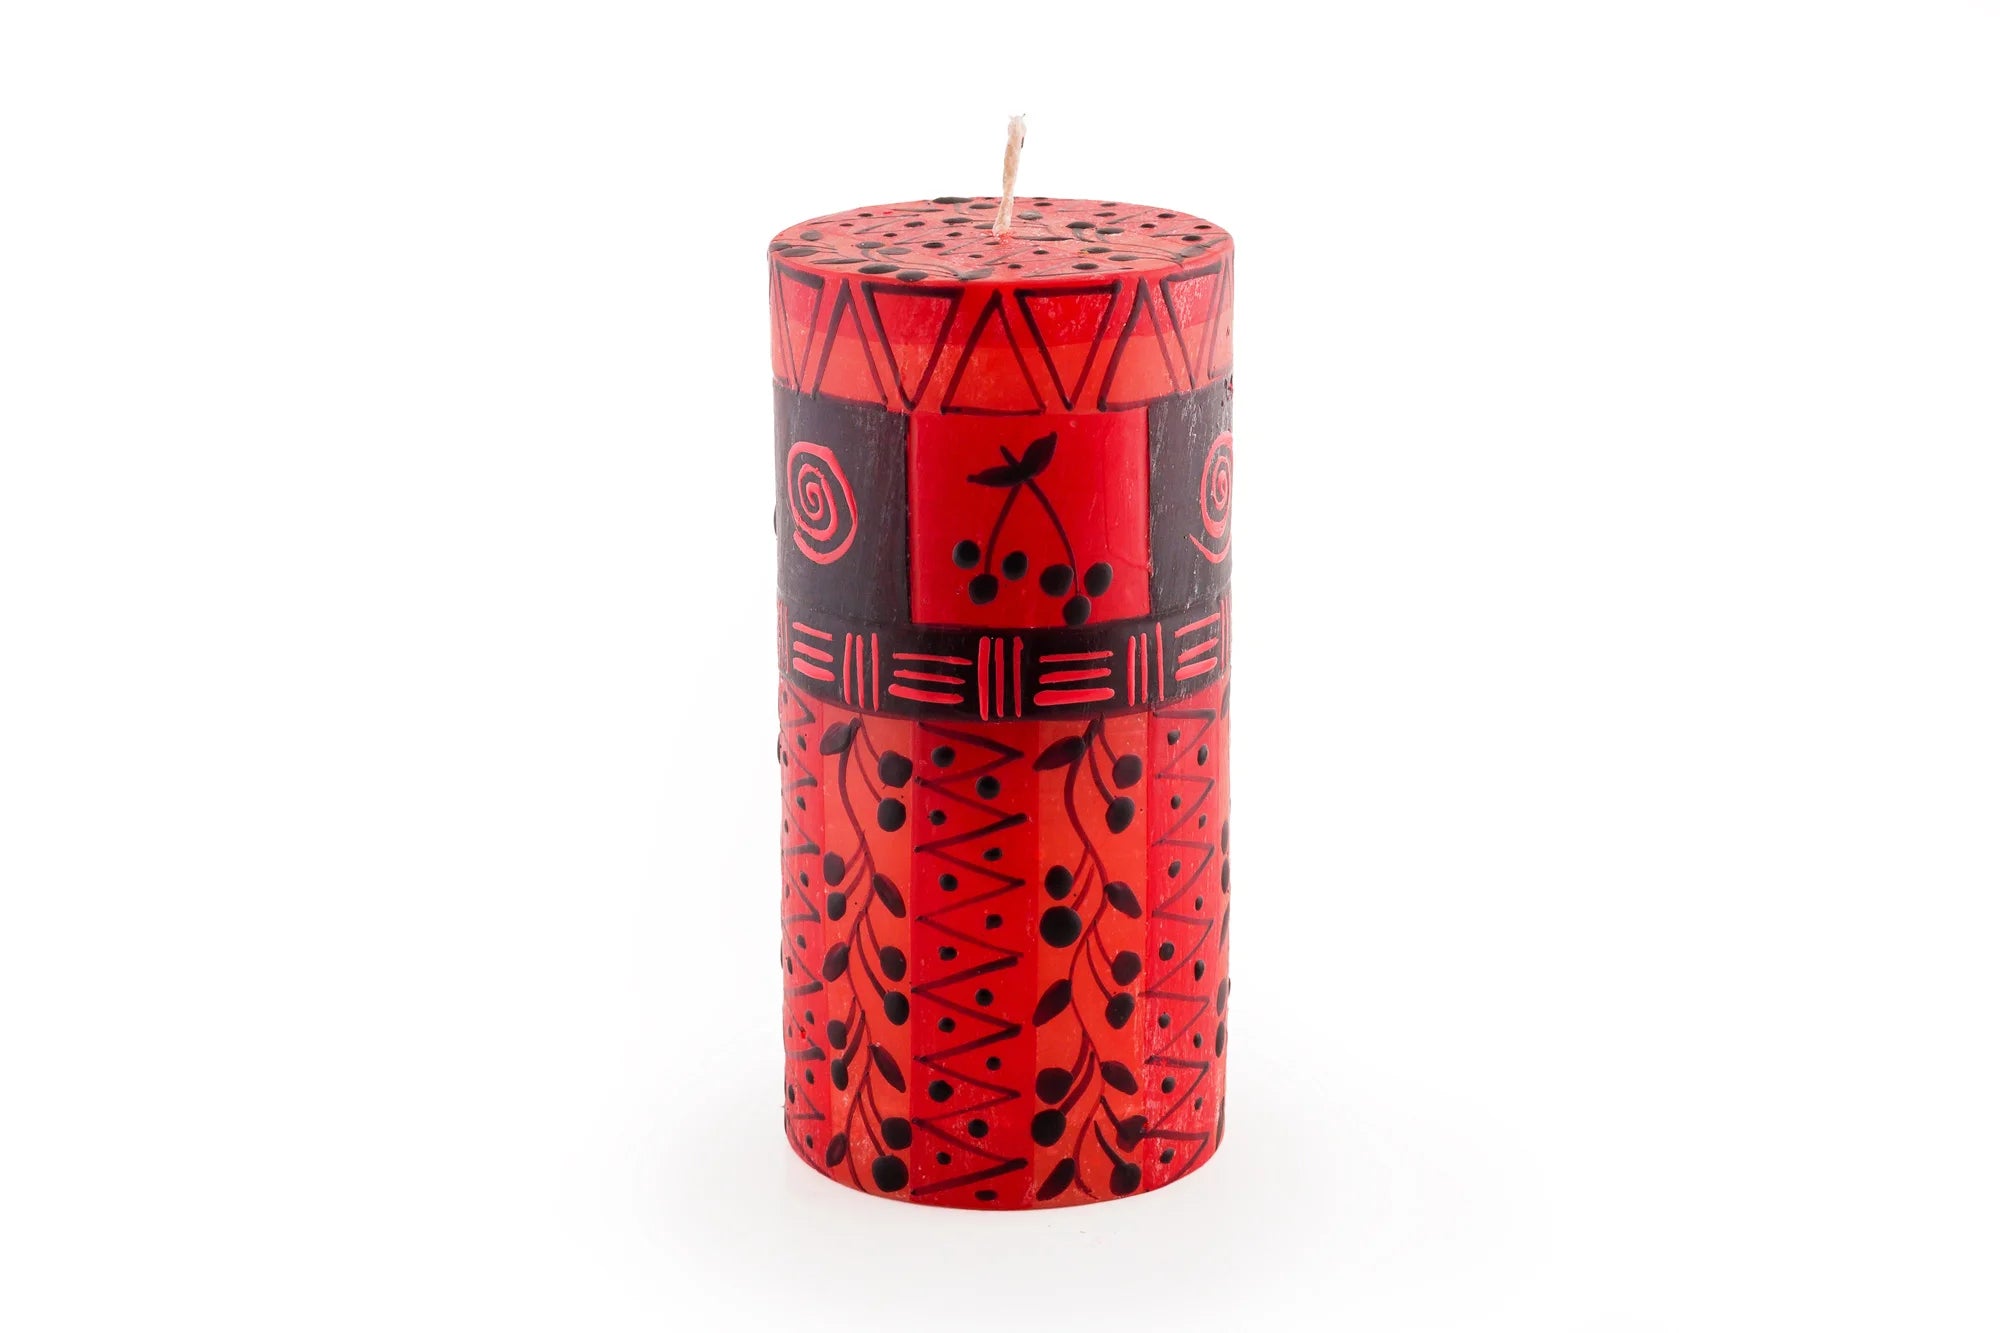 3" x 6" Berry Blaze pillar candle. Bright red with darker berry design mixed with geometric design.